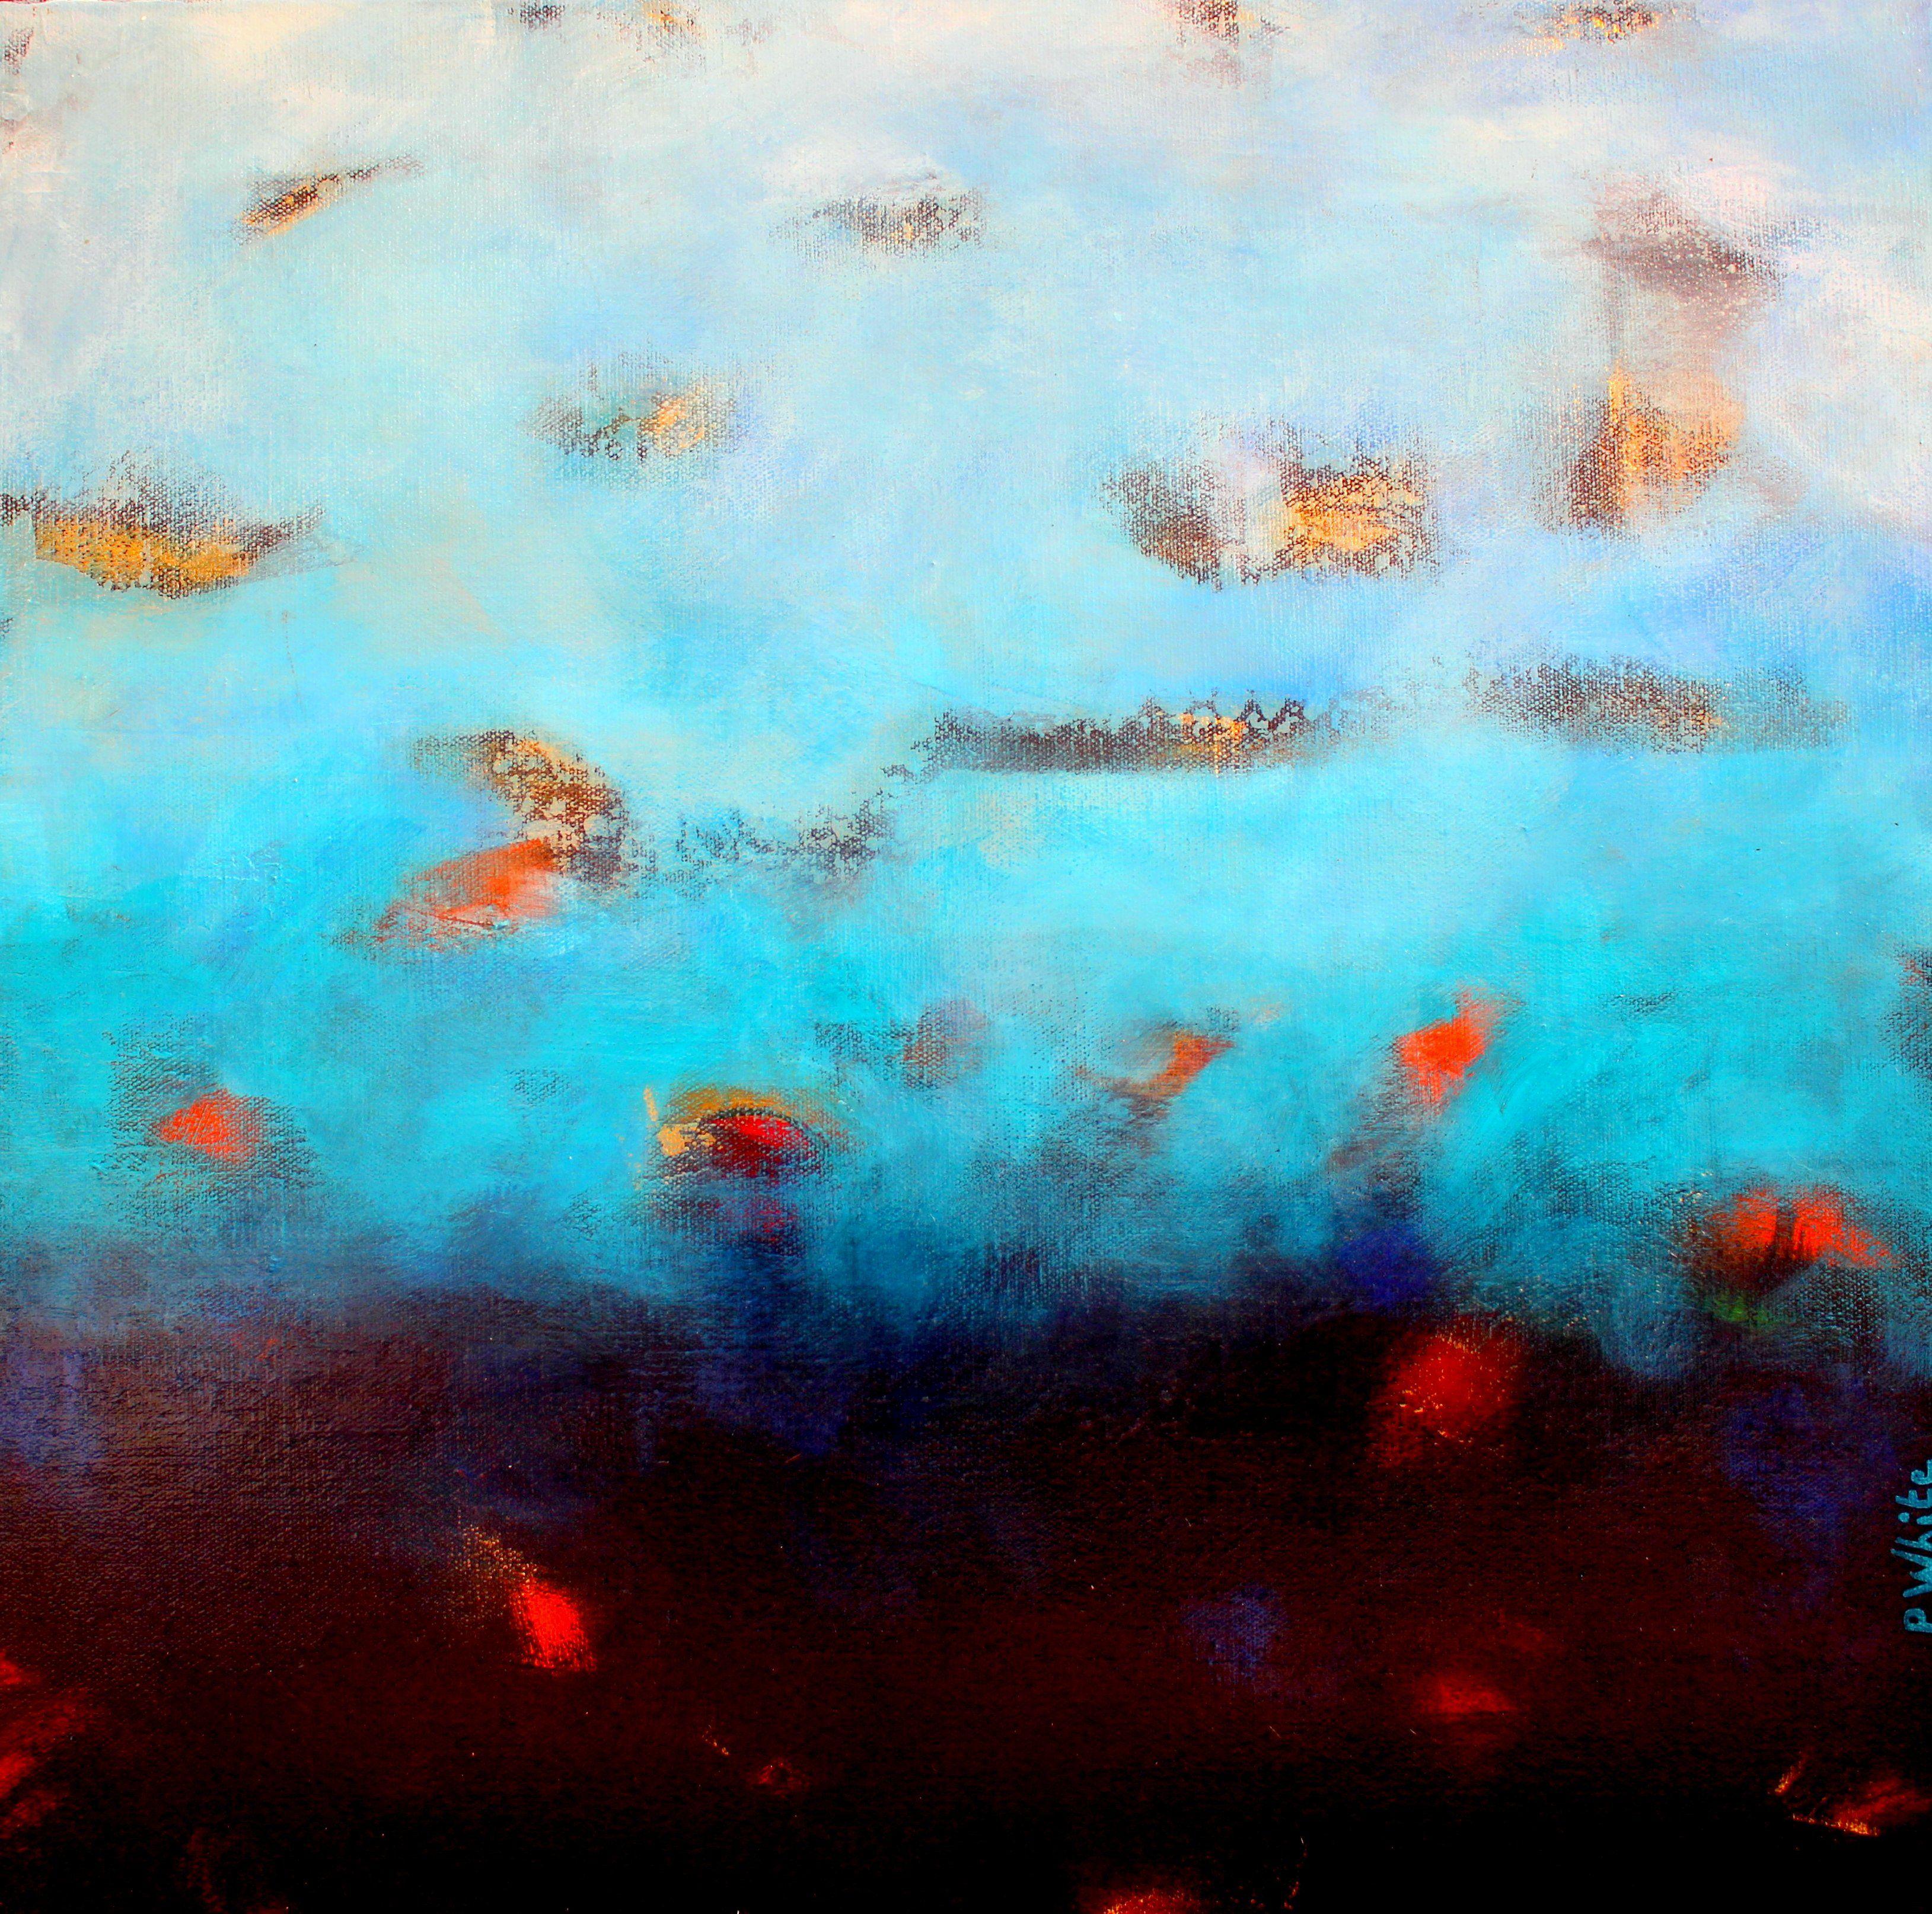 Acrylic painting done on canvas and varnished, signed and sold ready to hang. It is an abstract work imagined by goldfish in water and with vaporous effects contrasting with the flamboyant colors used: blue, red, gold ... :: Painting ::